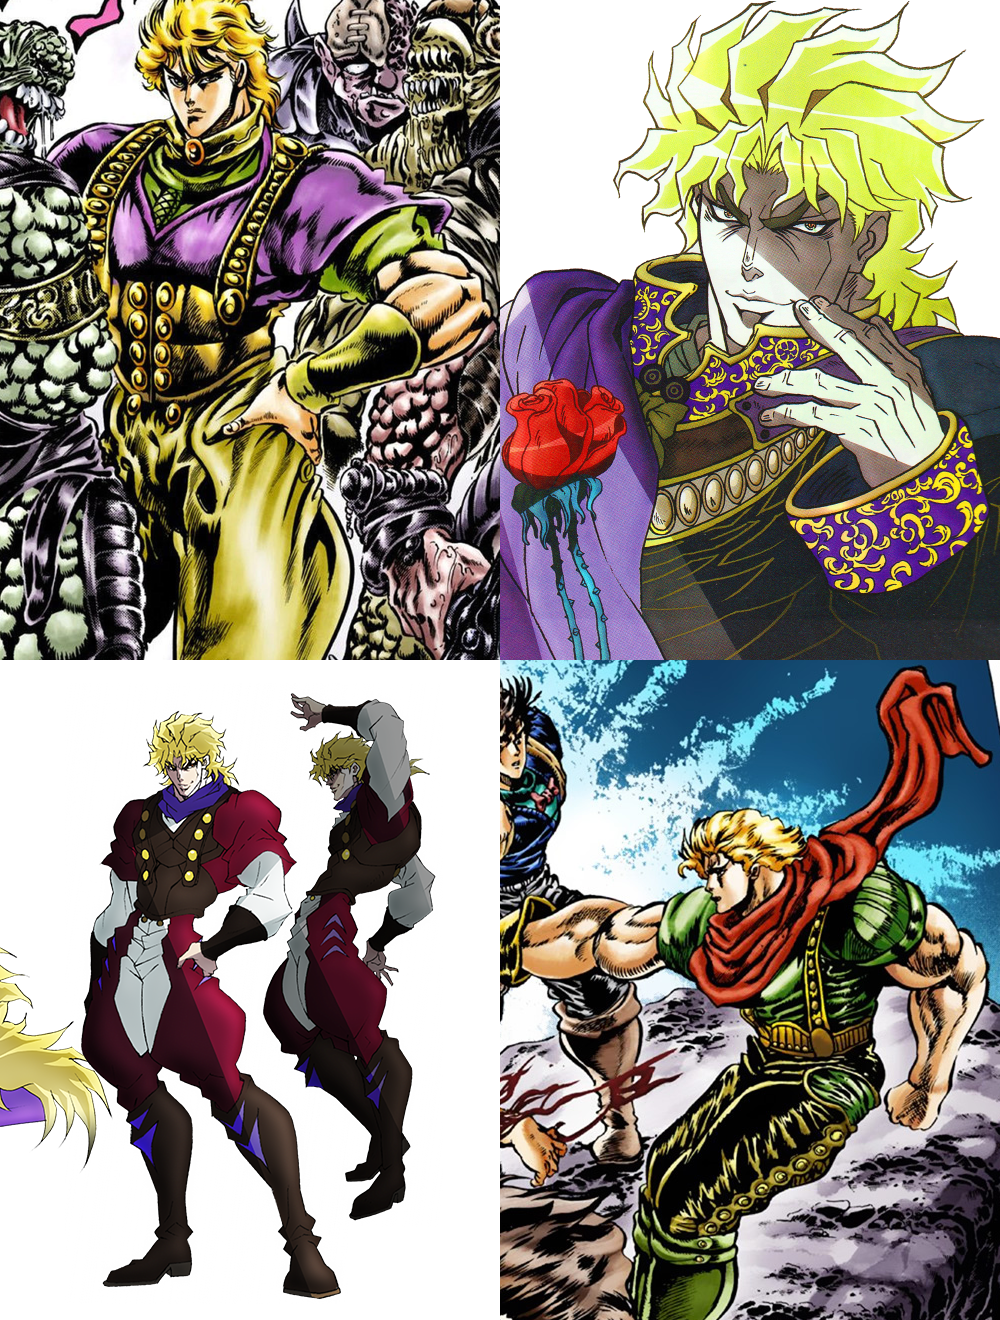 Come freely, go safely & leave some of the happiness you bring. — An  analysis of DIO's fashion choices. We may...